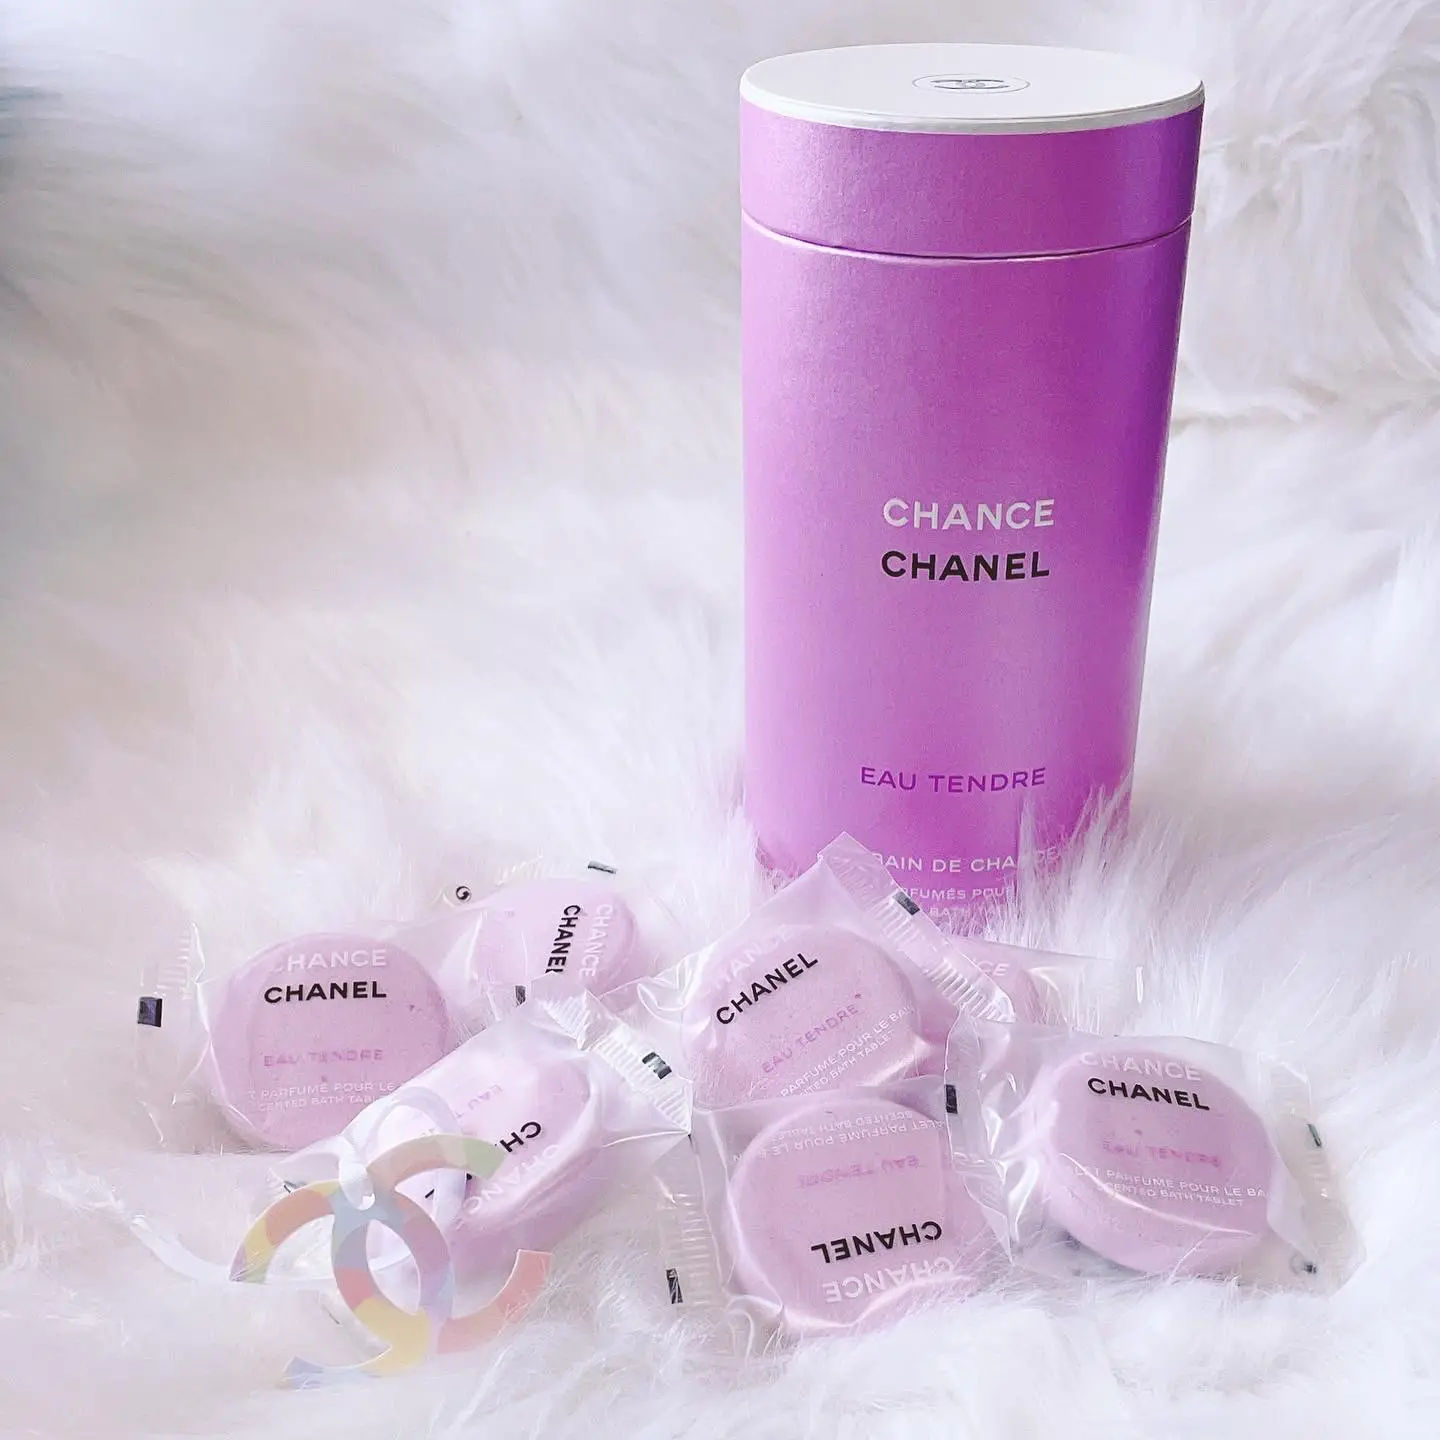 Luxurious bath time with Chanel bath tablets🛁💕